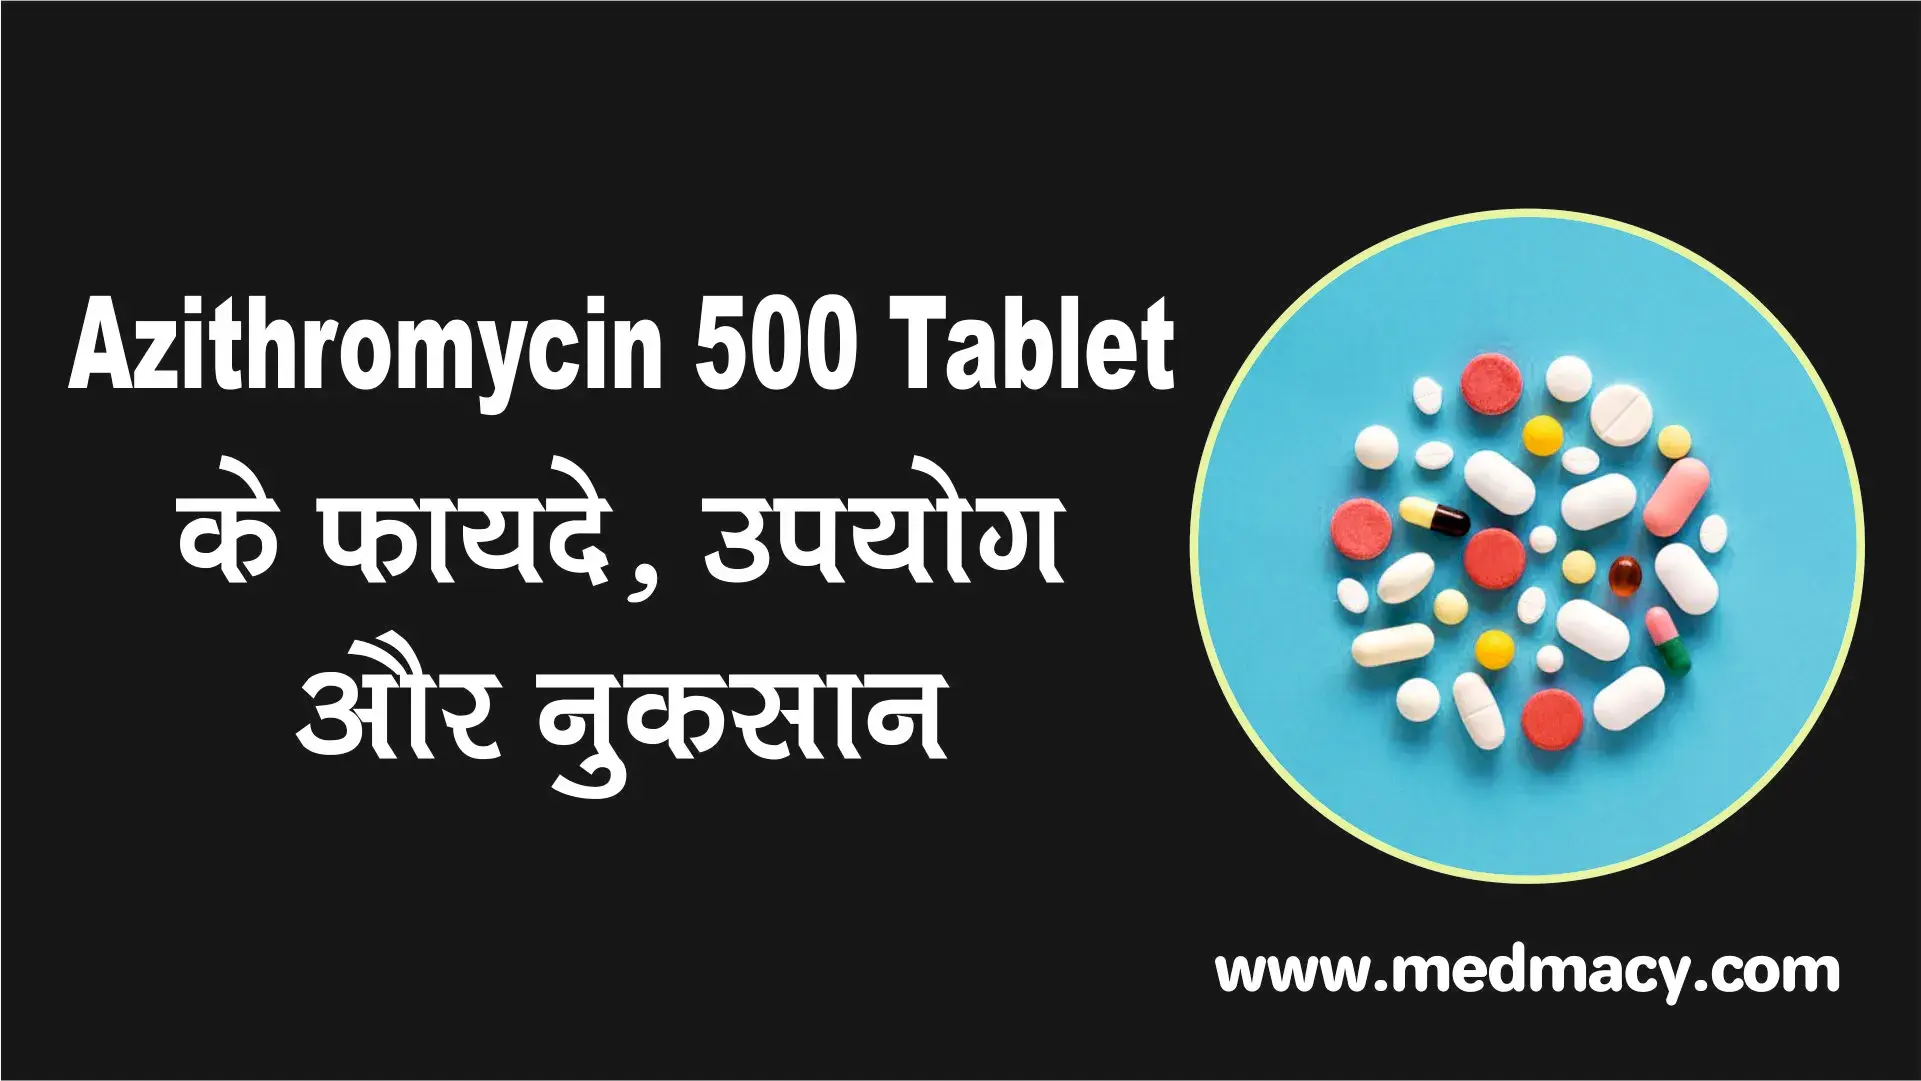 Azithromycin 500 Tablet Uses in Hindi